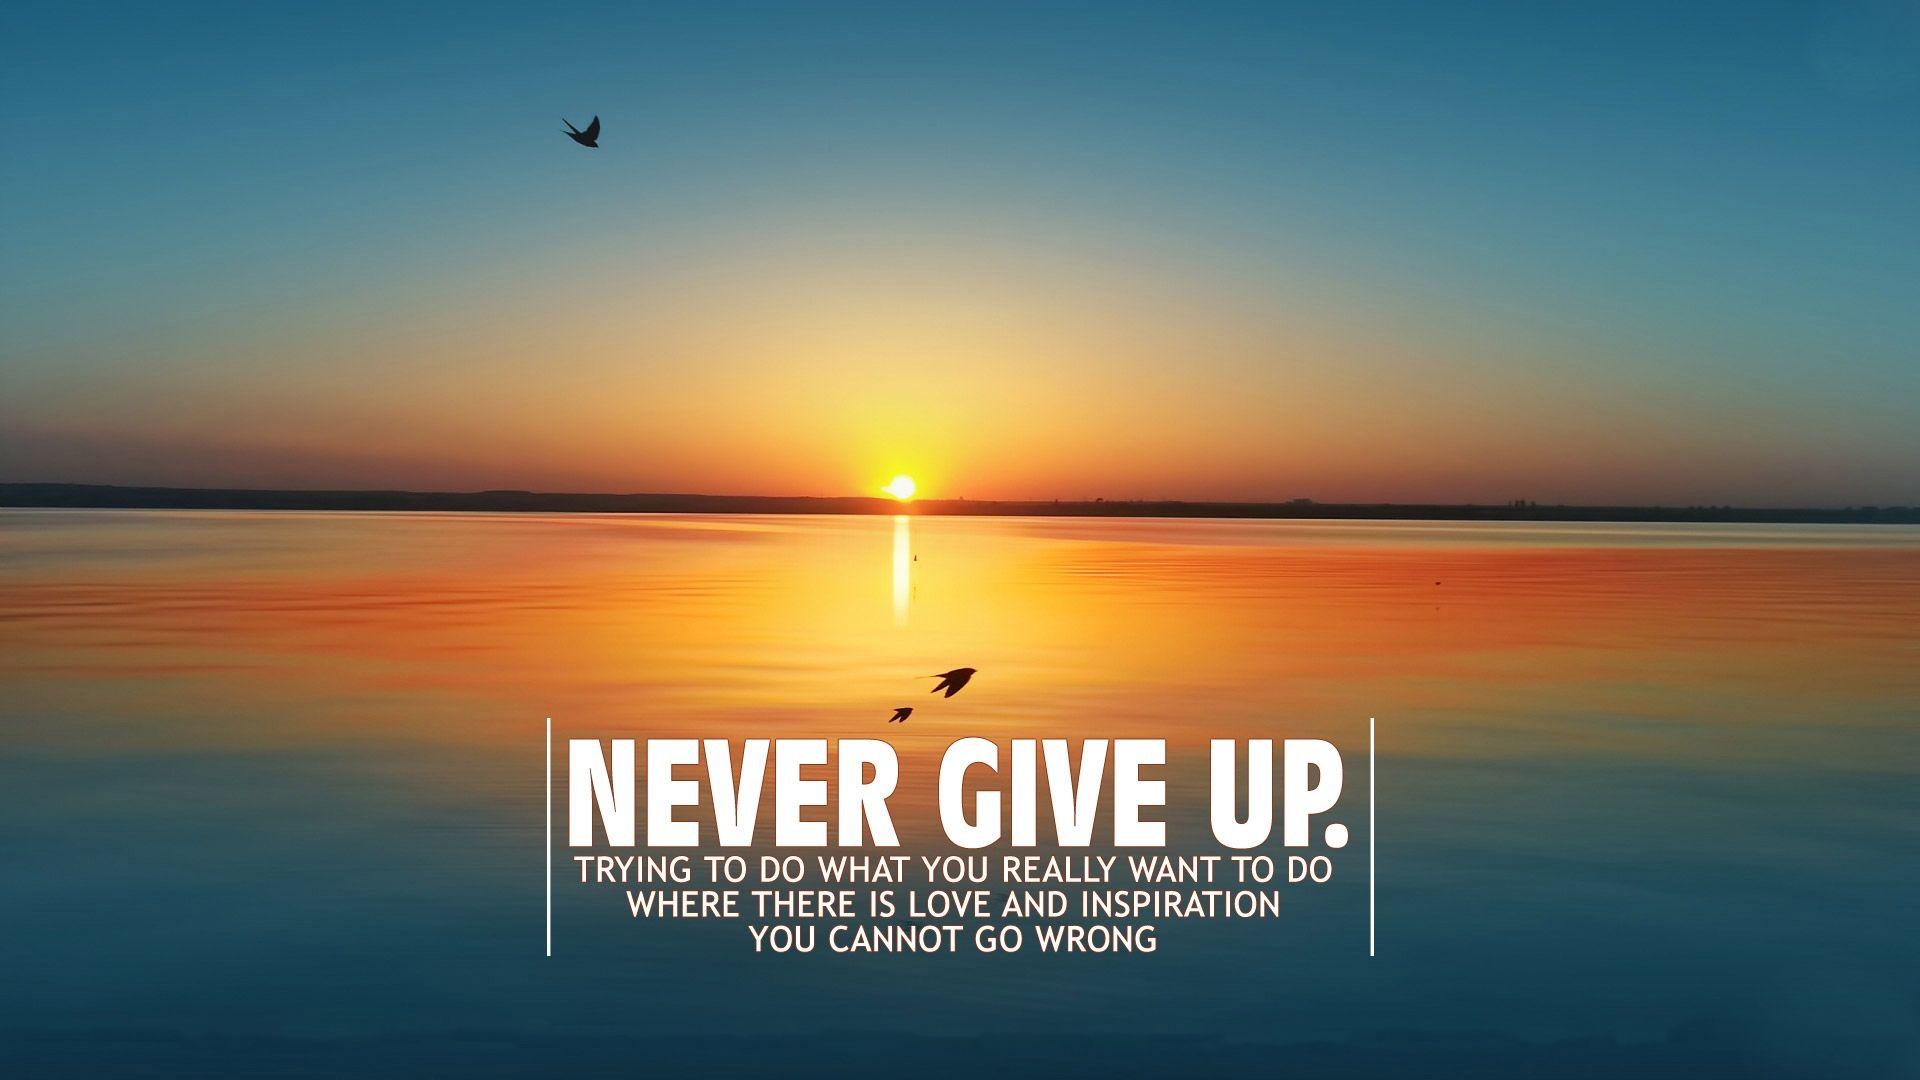 Never Give Up Quotes Wallpaper - photos and vectors